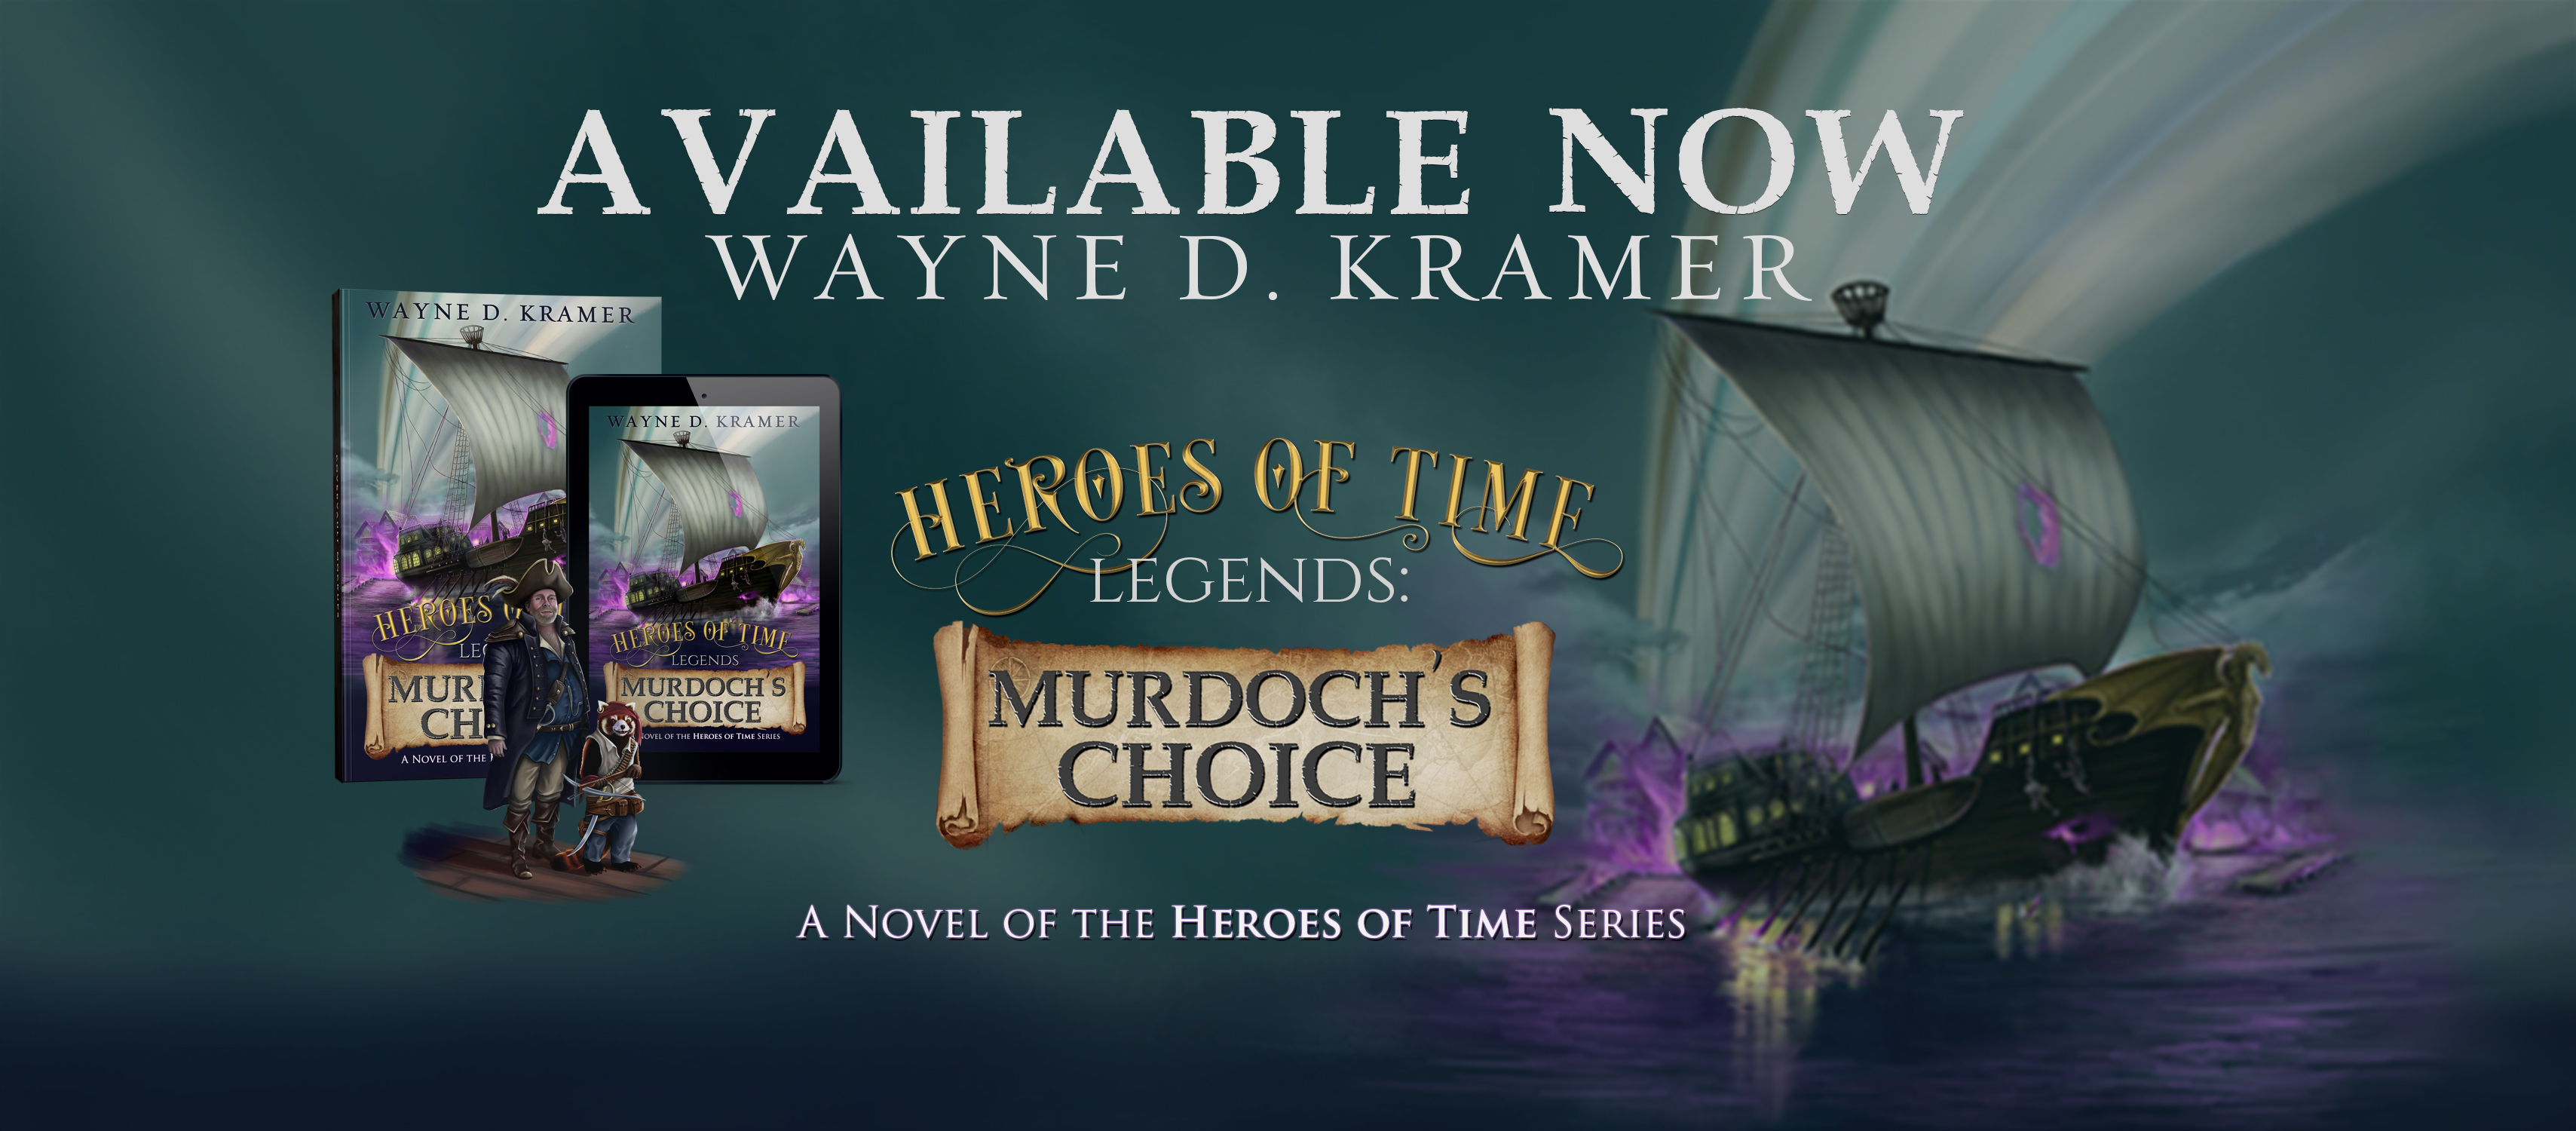 Heroes of Time Legends: Murdoch's Choice Setting Sail August 14th, 2021